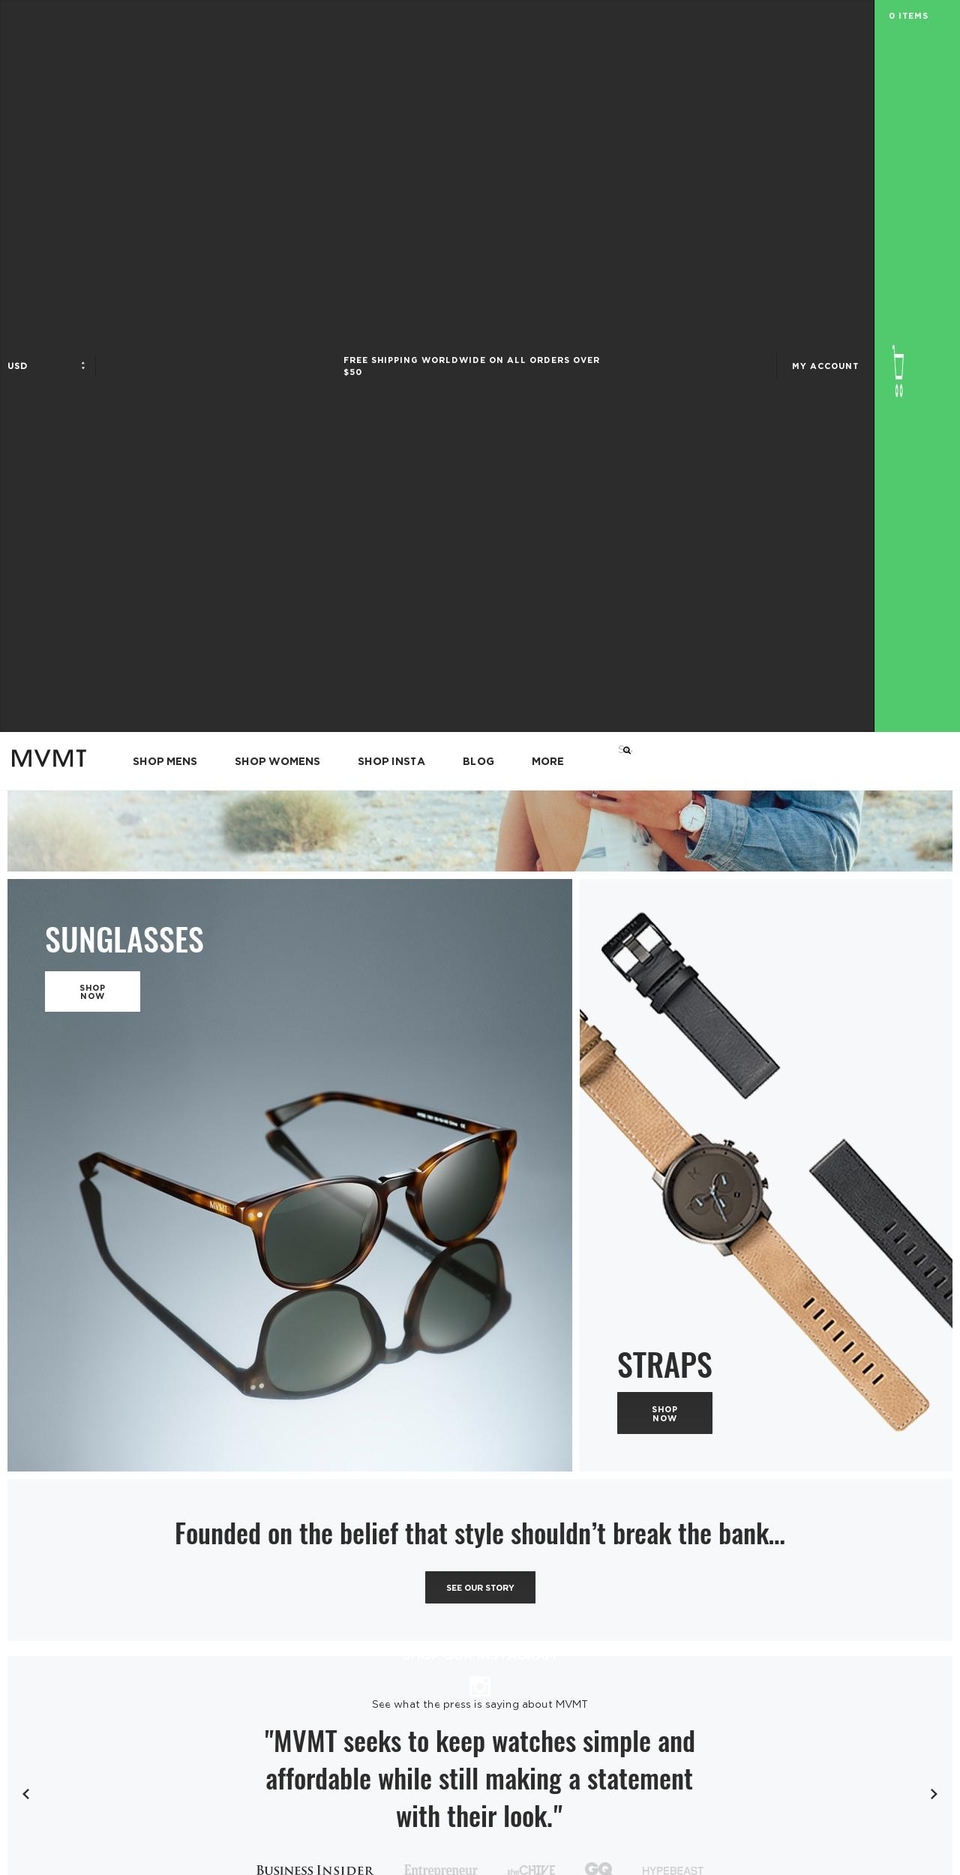 MVMT NEW - Production Shopify theme site example mvmt.be